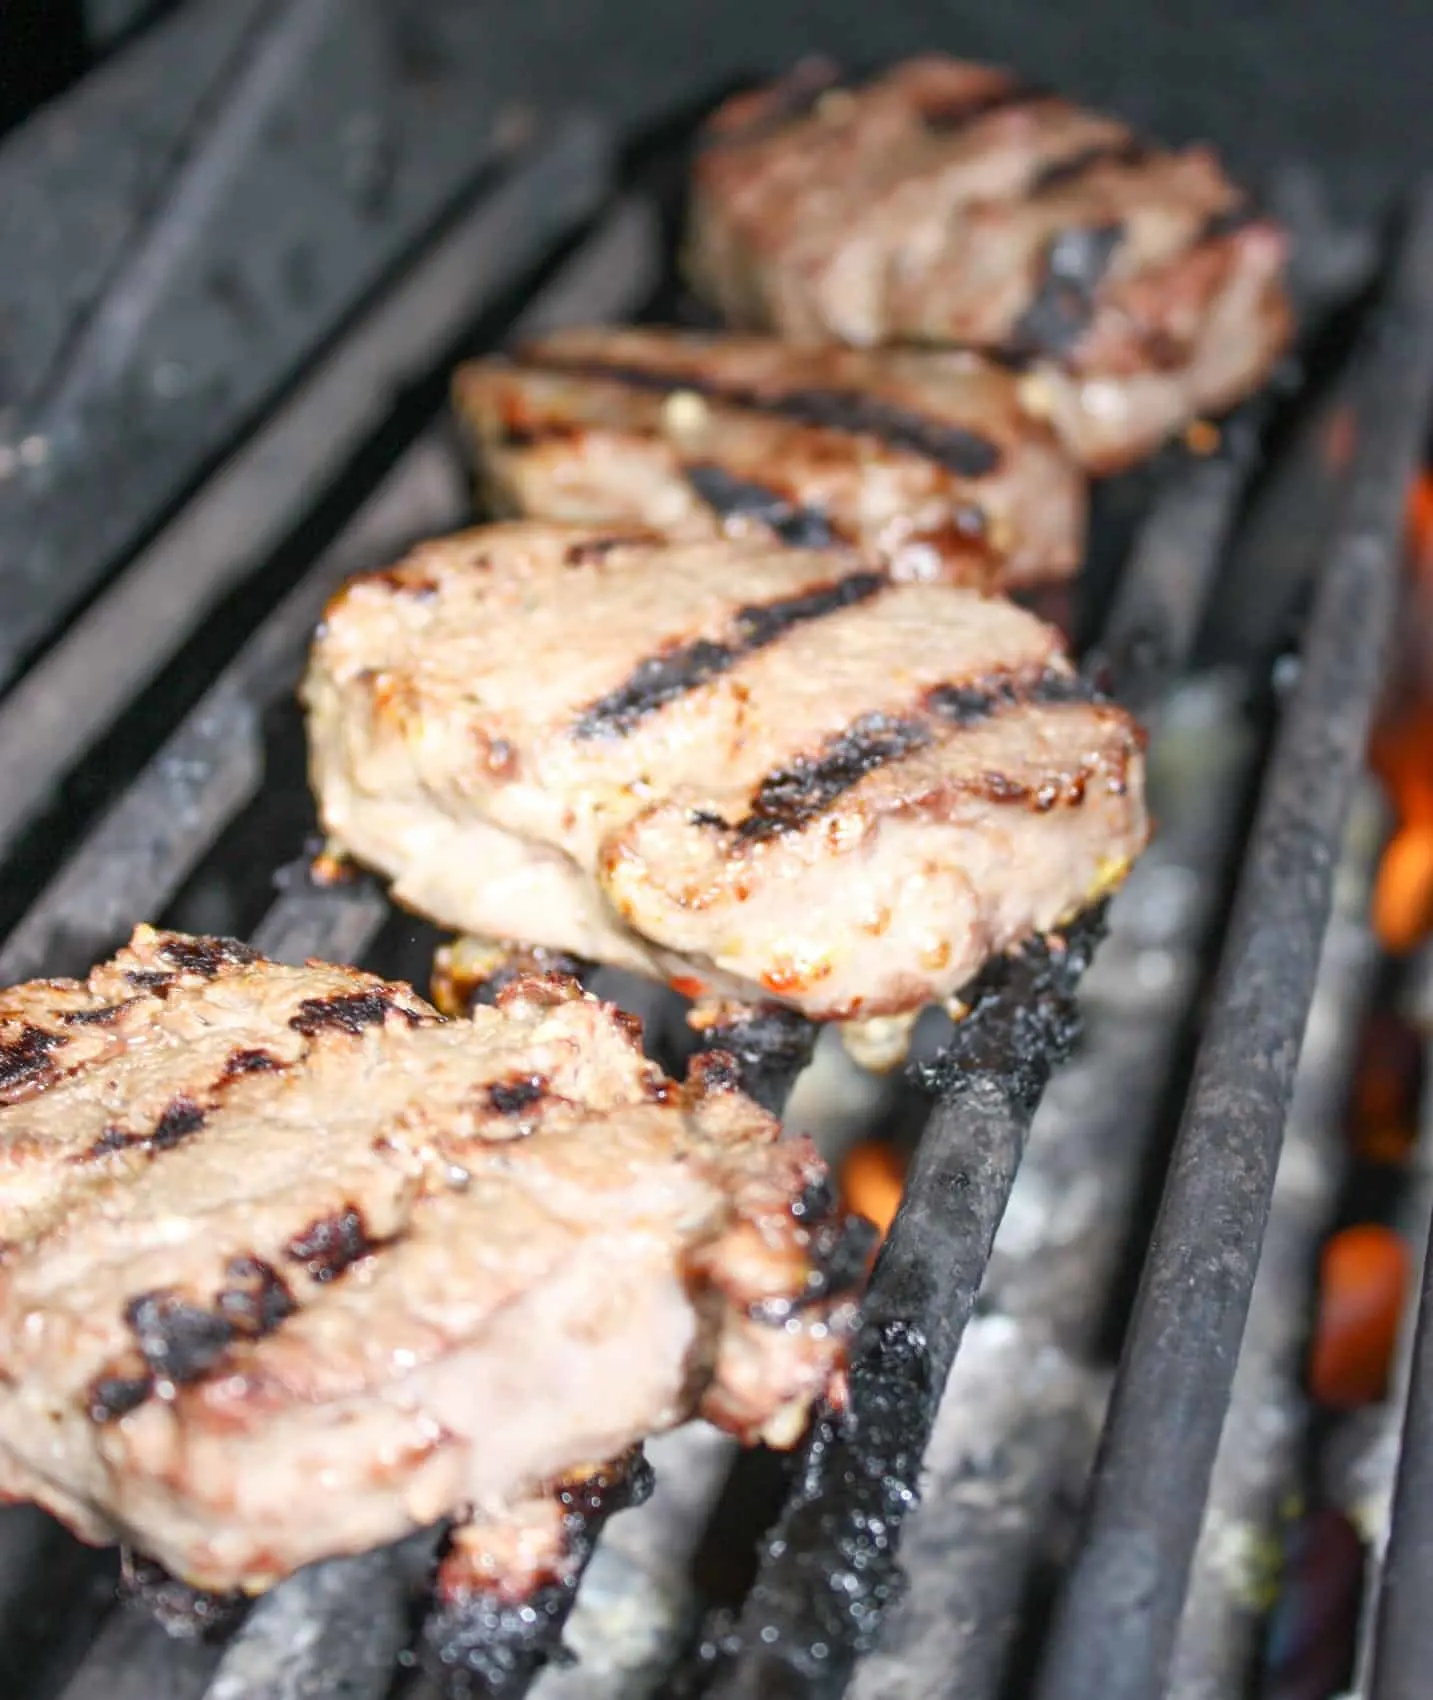 Enjoy these tender, juicy Grilled Venison Loin Chops with your favourite sides.  